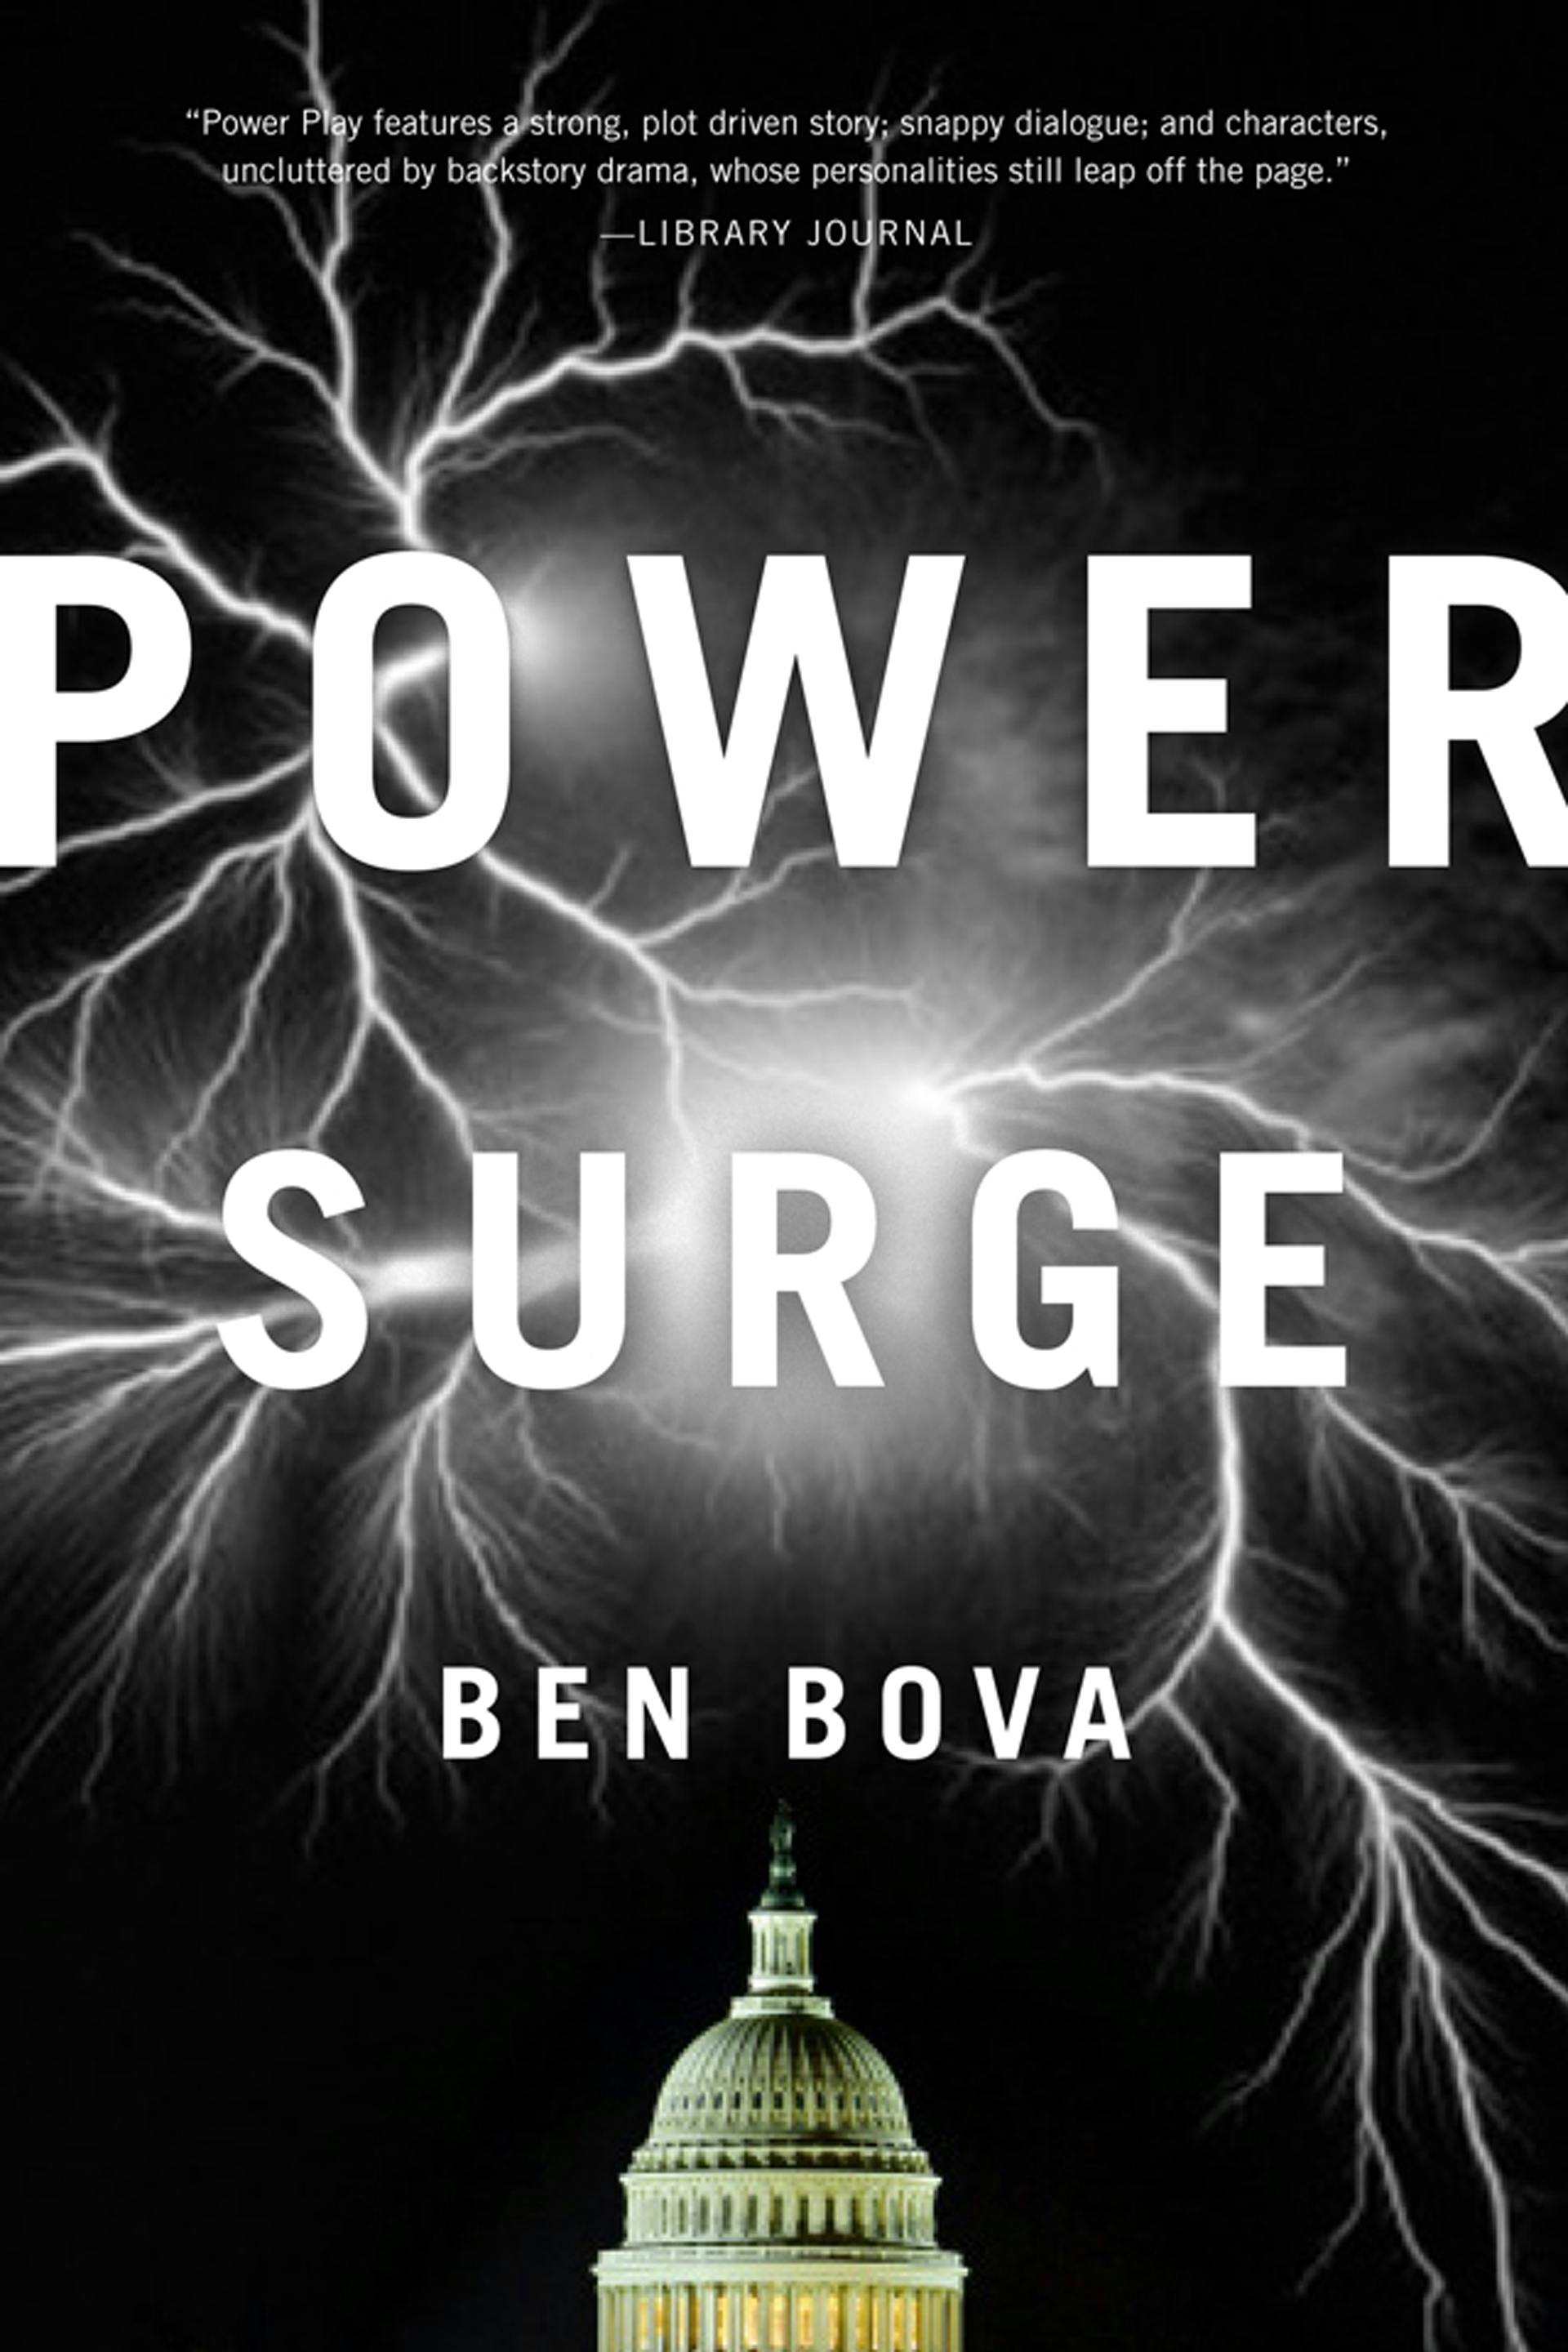 Cover for the book titled as: Power Surge